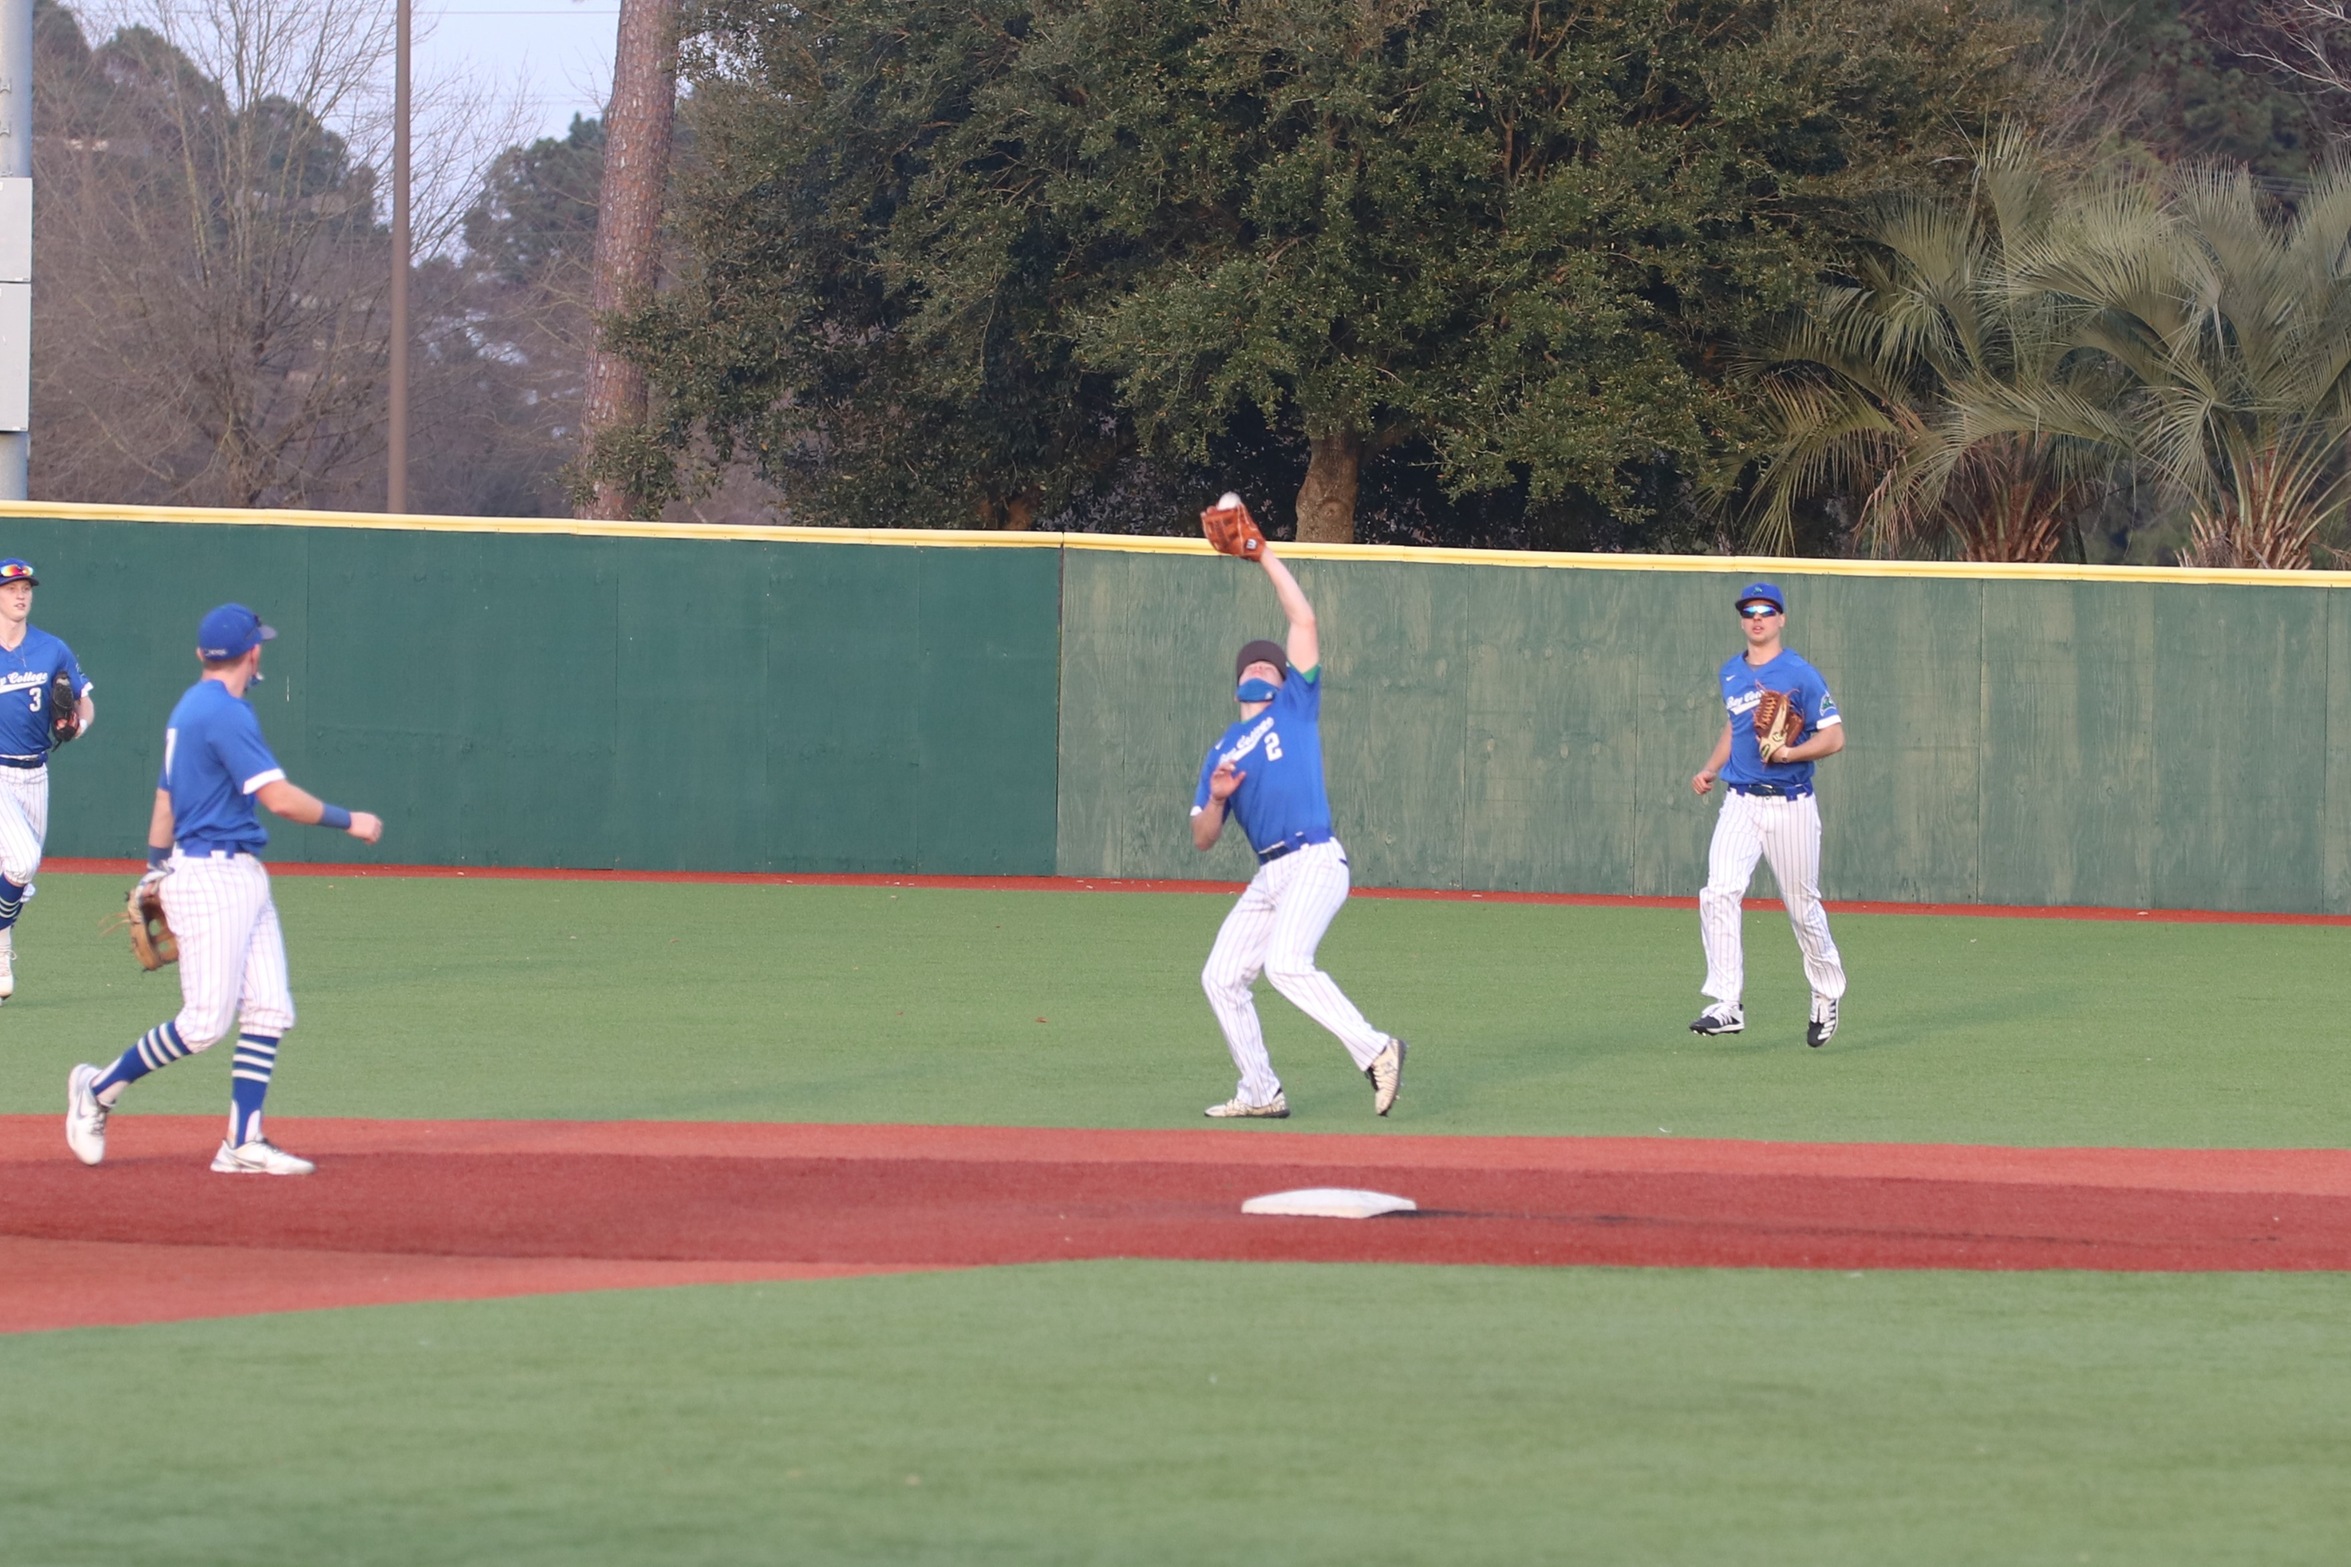 Carson Shea catches a pop fly as his teammates look on